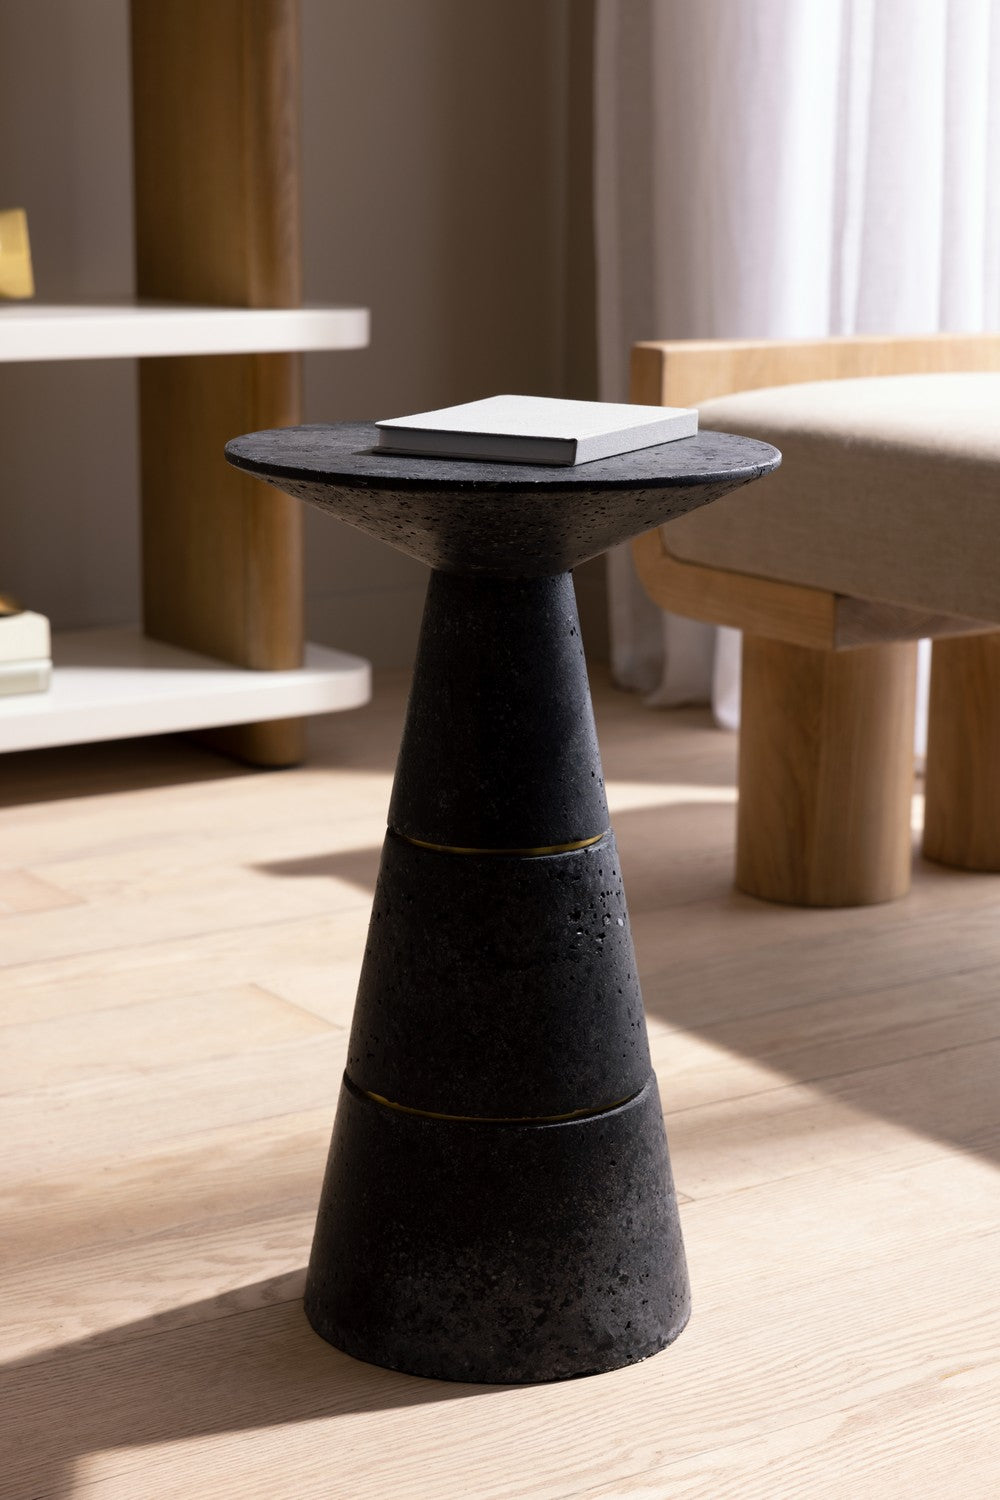 Accent Table from the Verwall collection in Charcoal finish